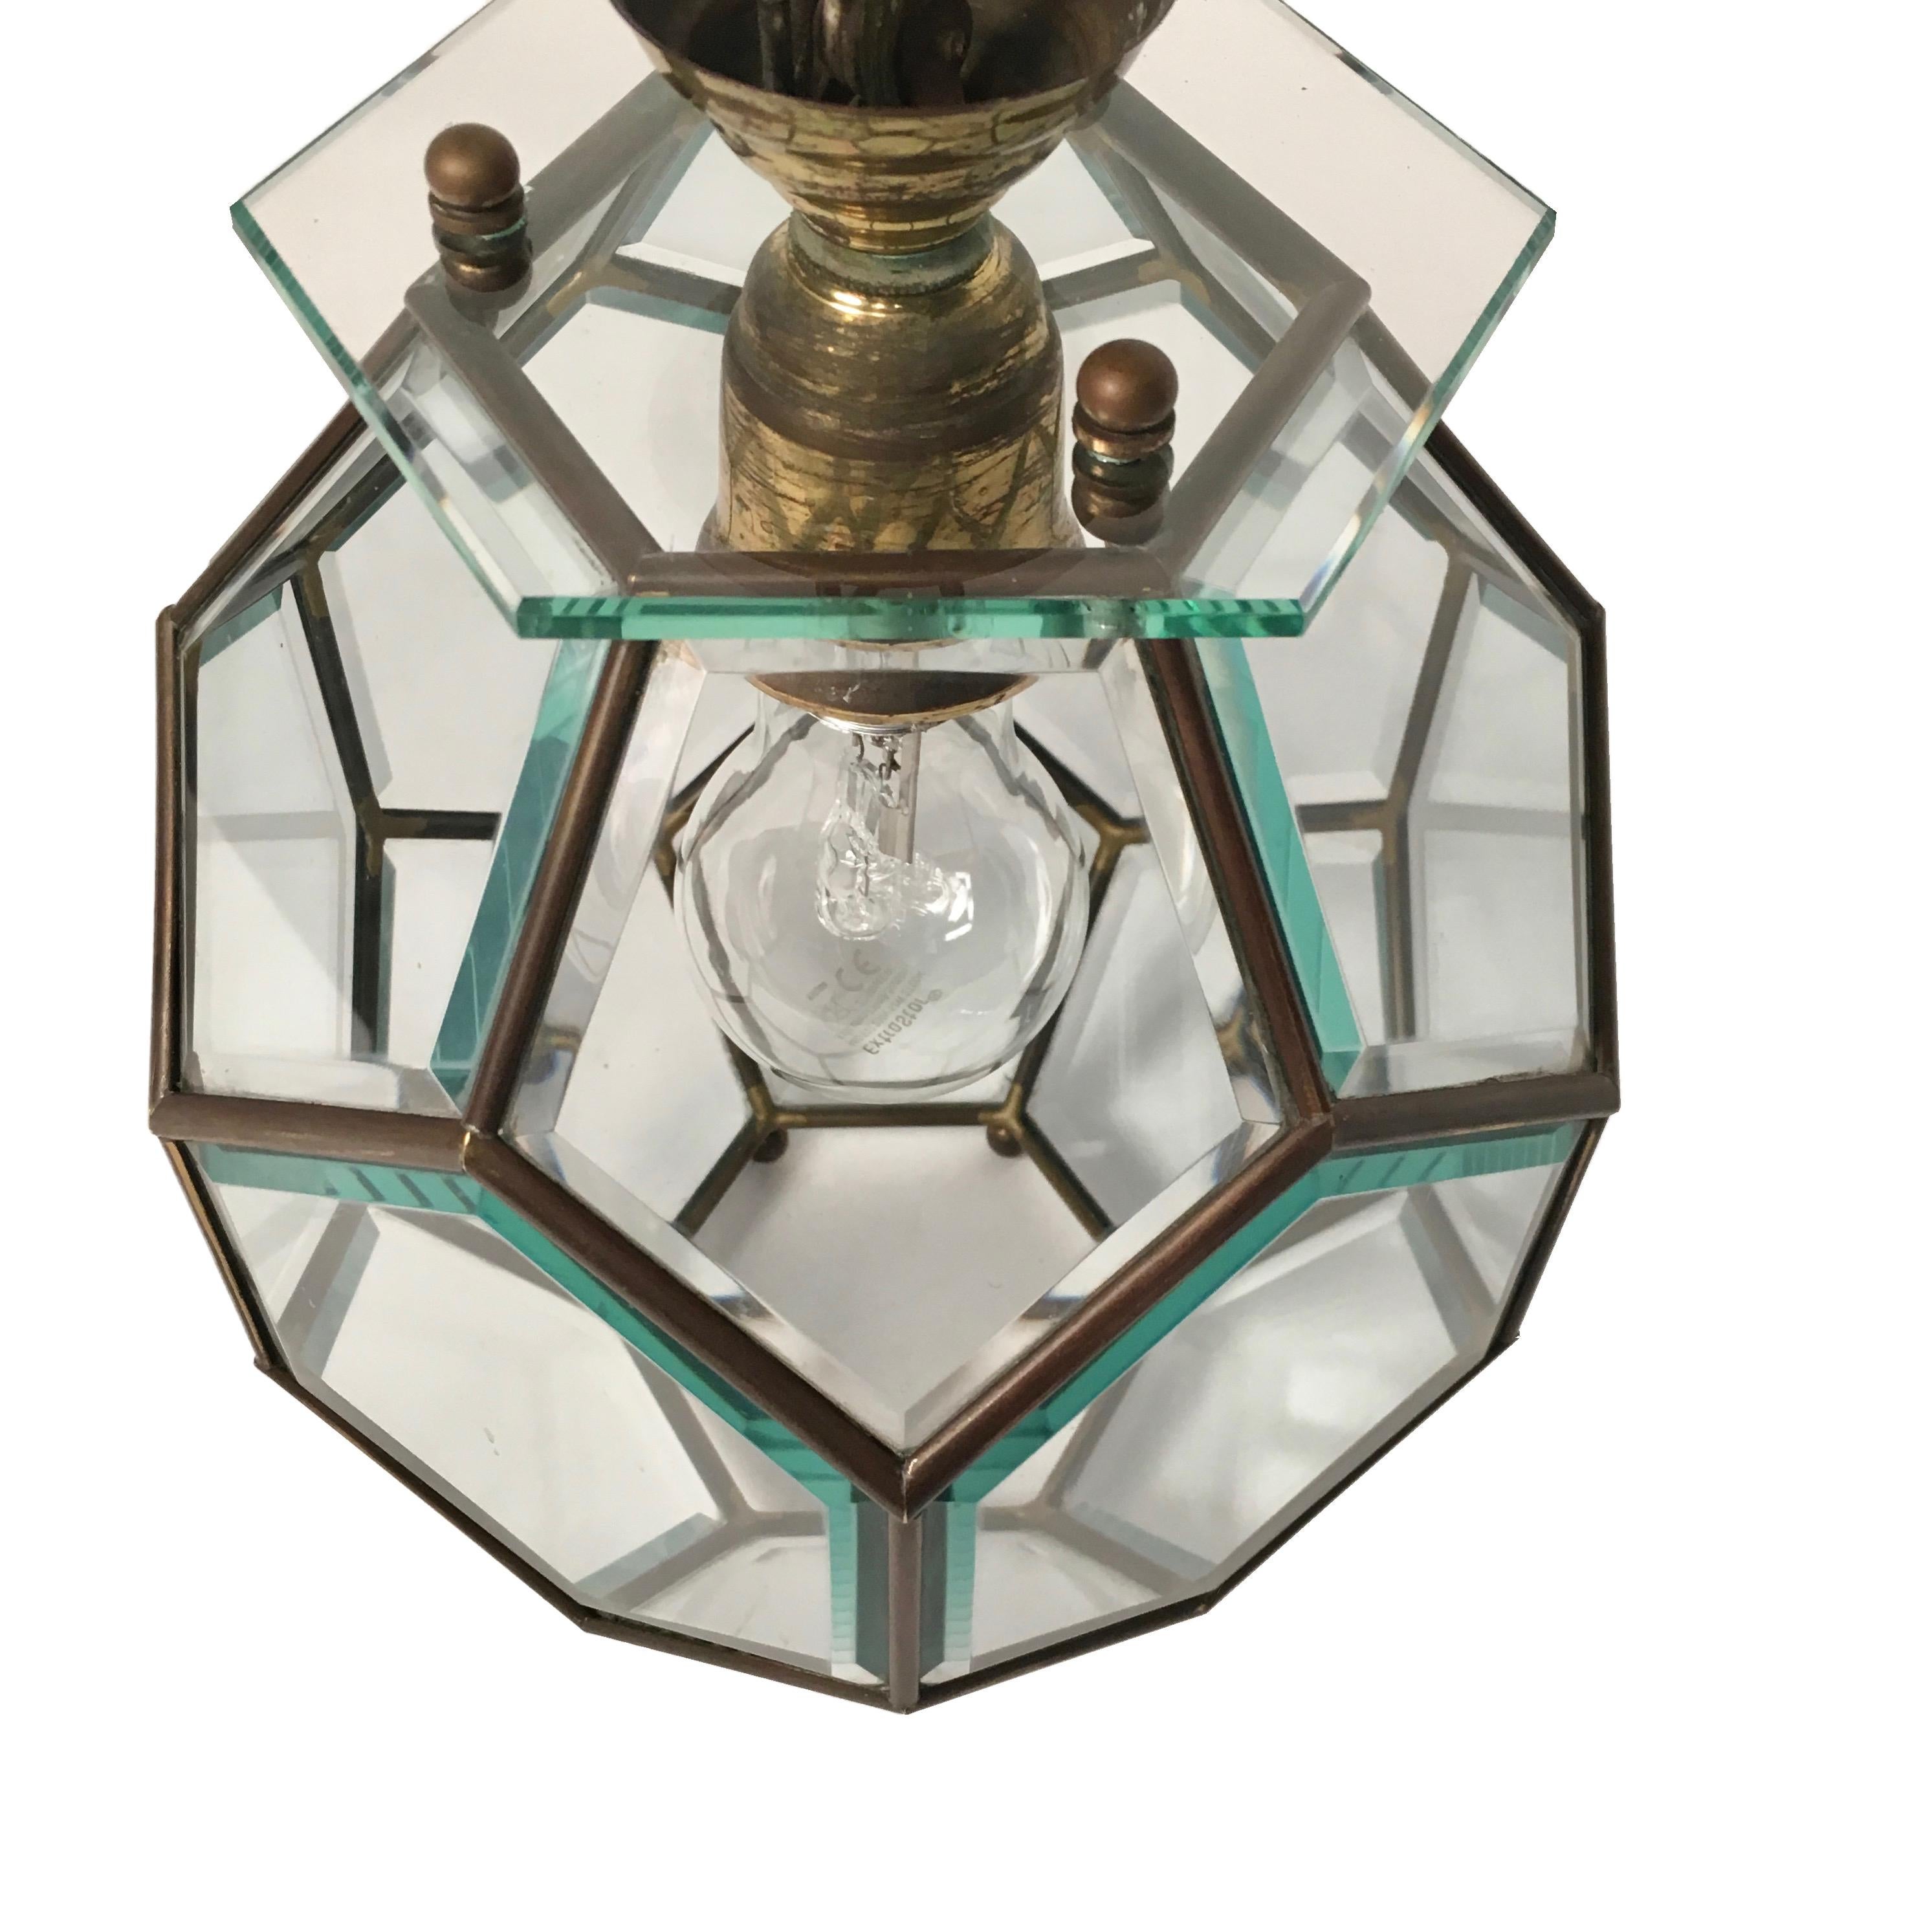 This beautiful shiny lantern has a hexagonal shape and presents a brass frame and many fragments made of cut shiny crystal glass.
In the middle of the lantern is the bulb holder for one big Edison bulb. All details as well as chain and canopy are